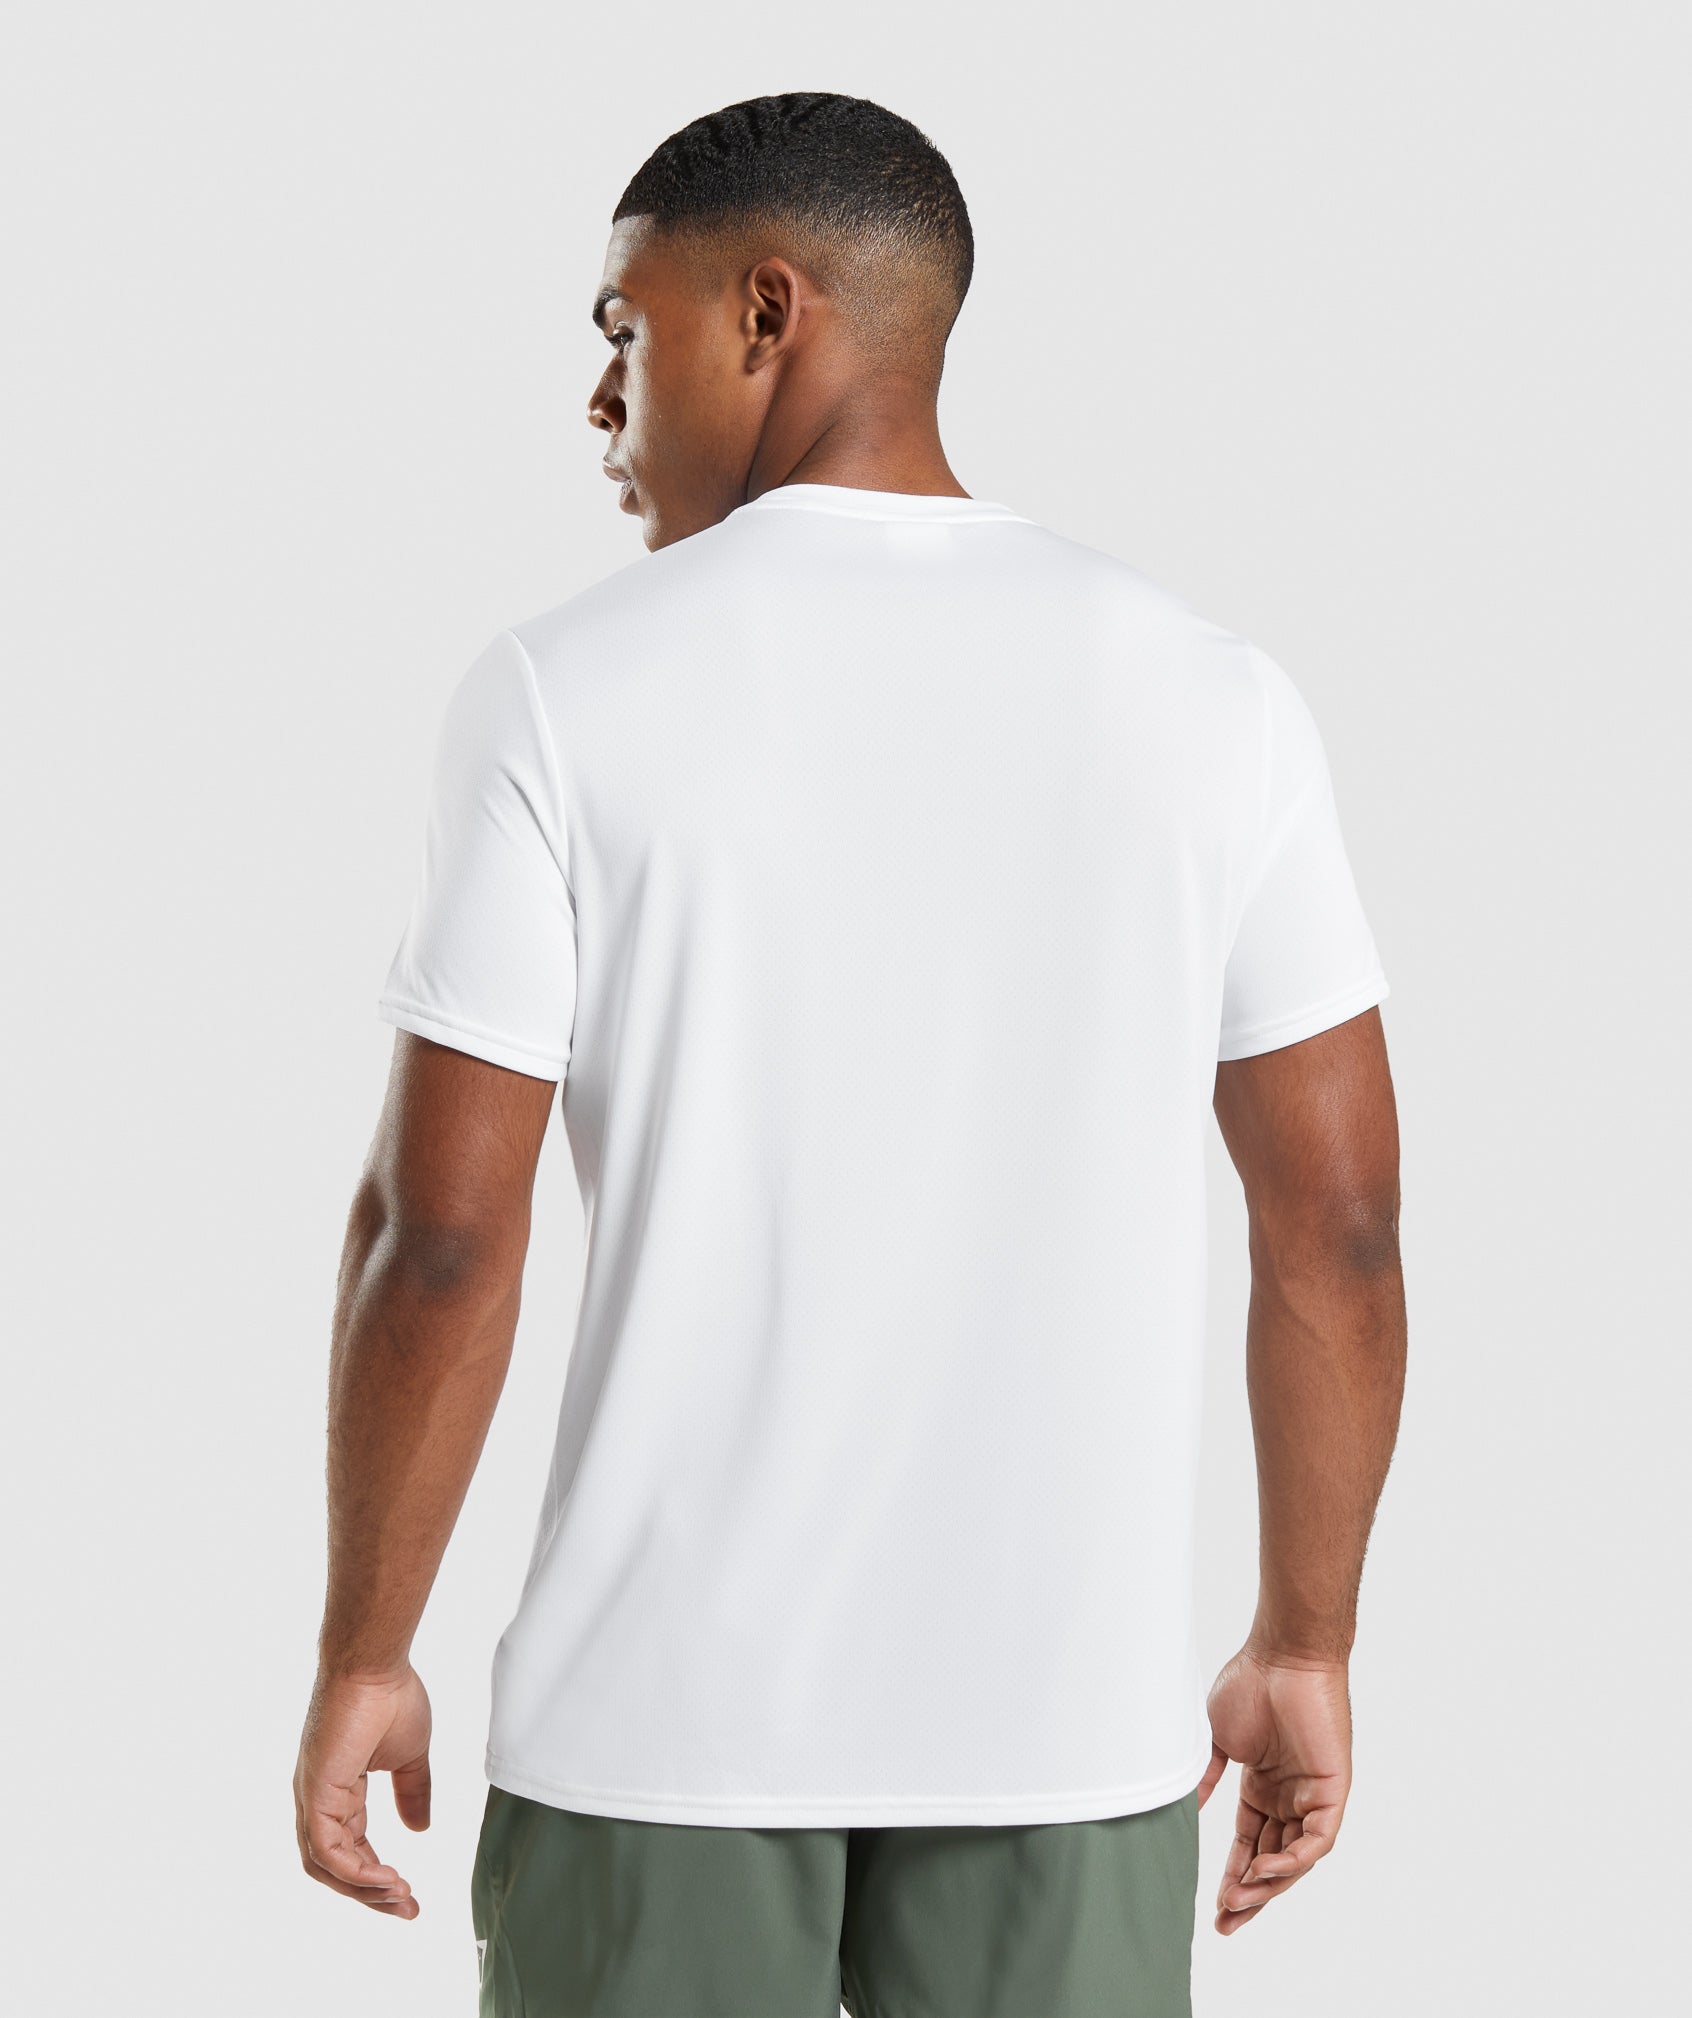 Arrival Regular Fit T-Shirt in White - view 3